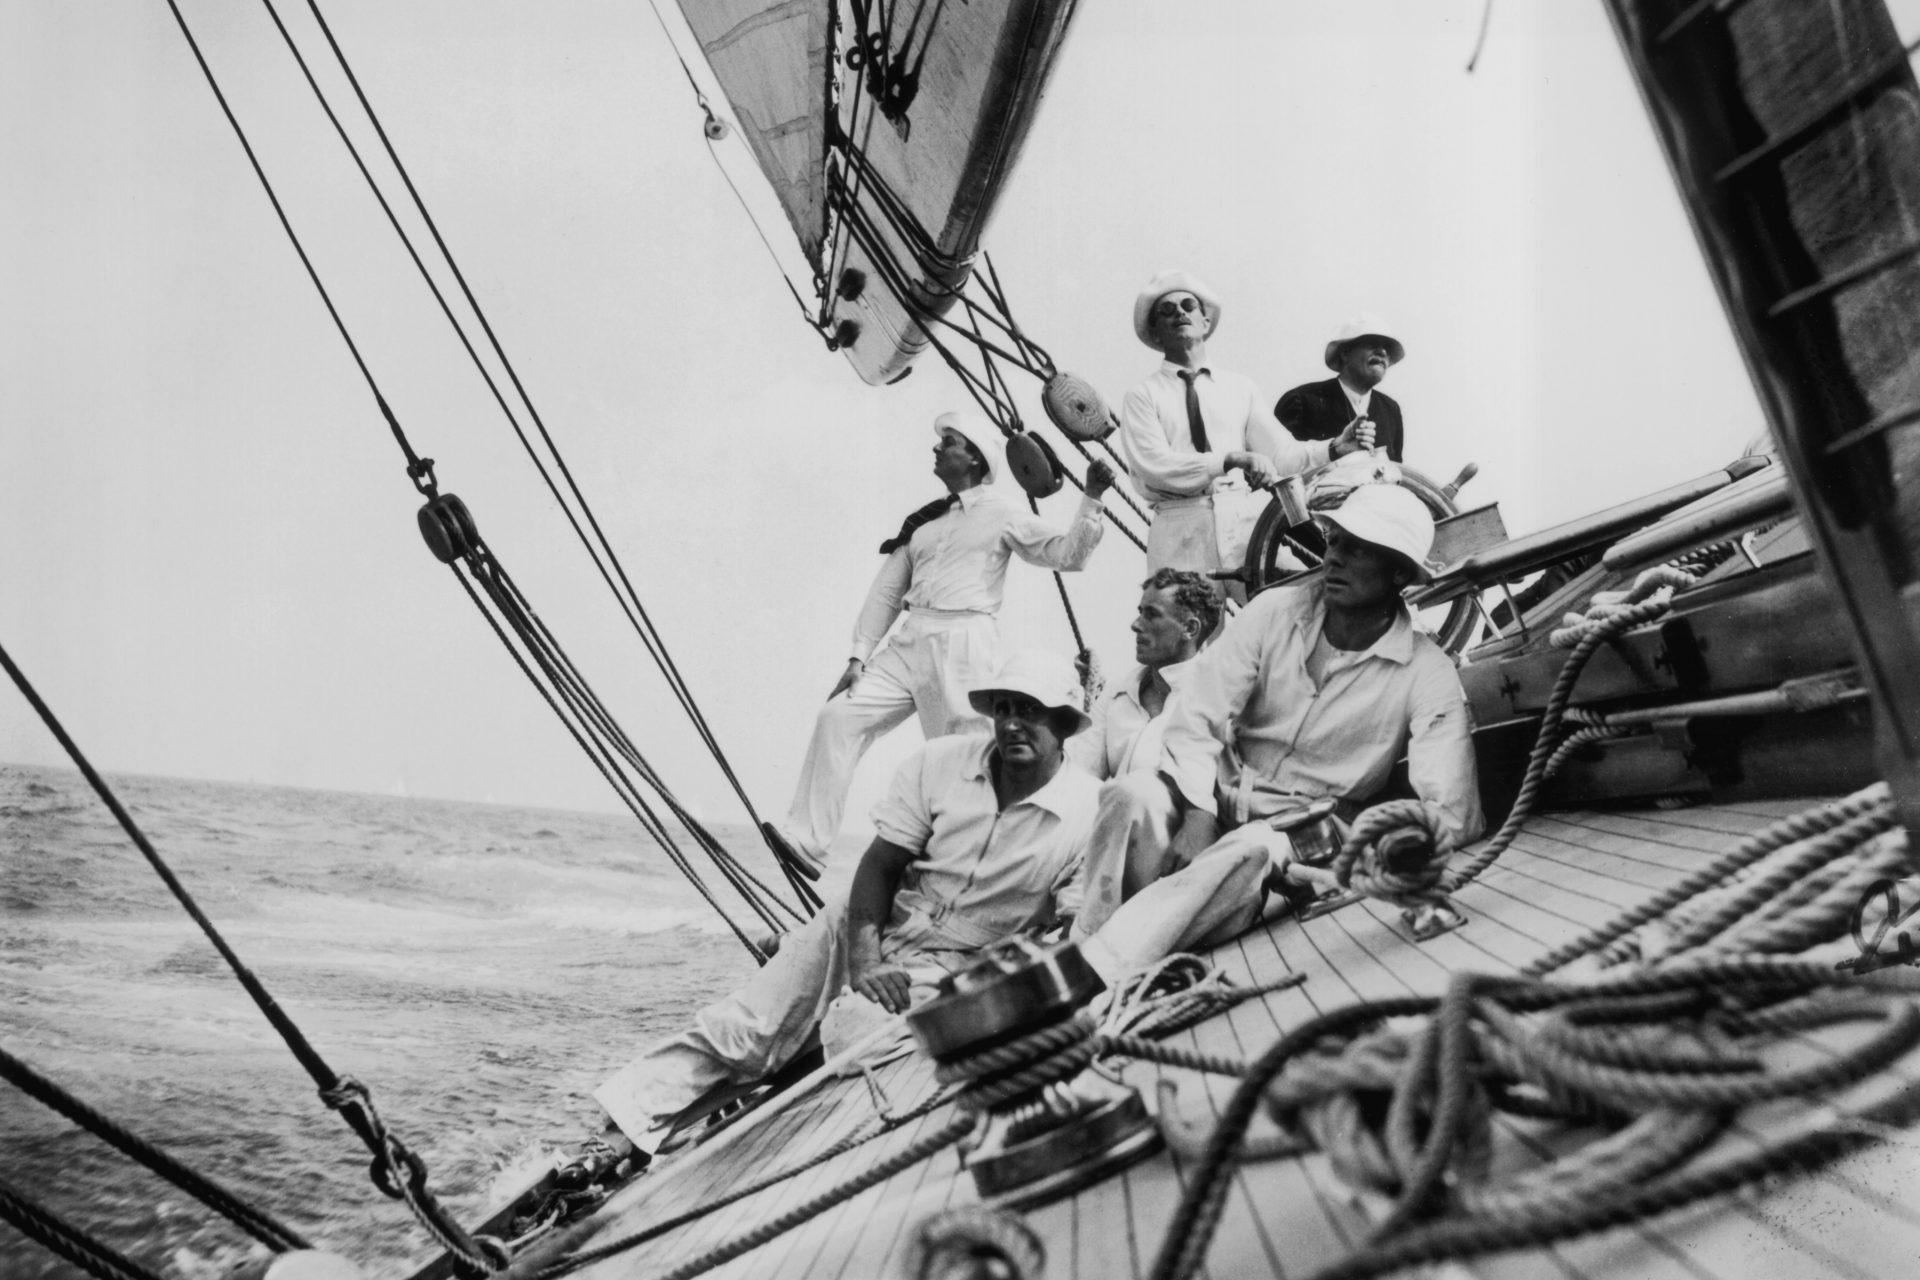 <p><span>Bill King was another strong contender, as a former Royal Navy submarine commander, many thought he was going to cross the line first. He built a 42ft junk-rigged schooner and named it Galway Blazer. The ship was designed for heavy conditions and its rigging was designed to sustain strong winds. </span></p>